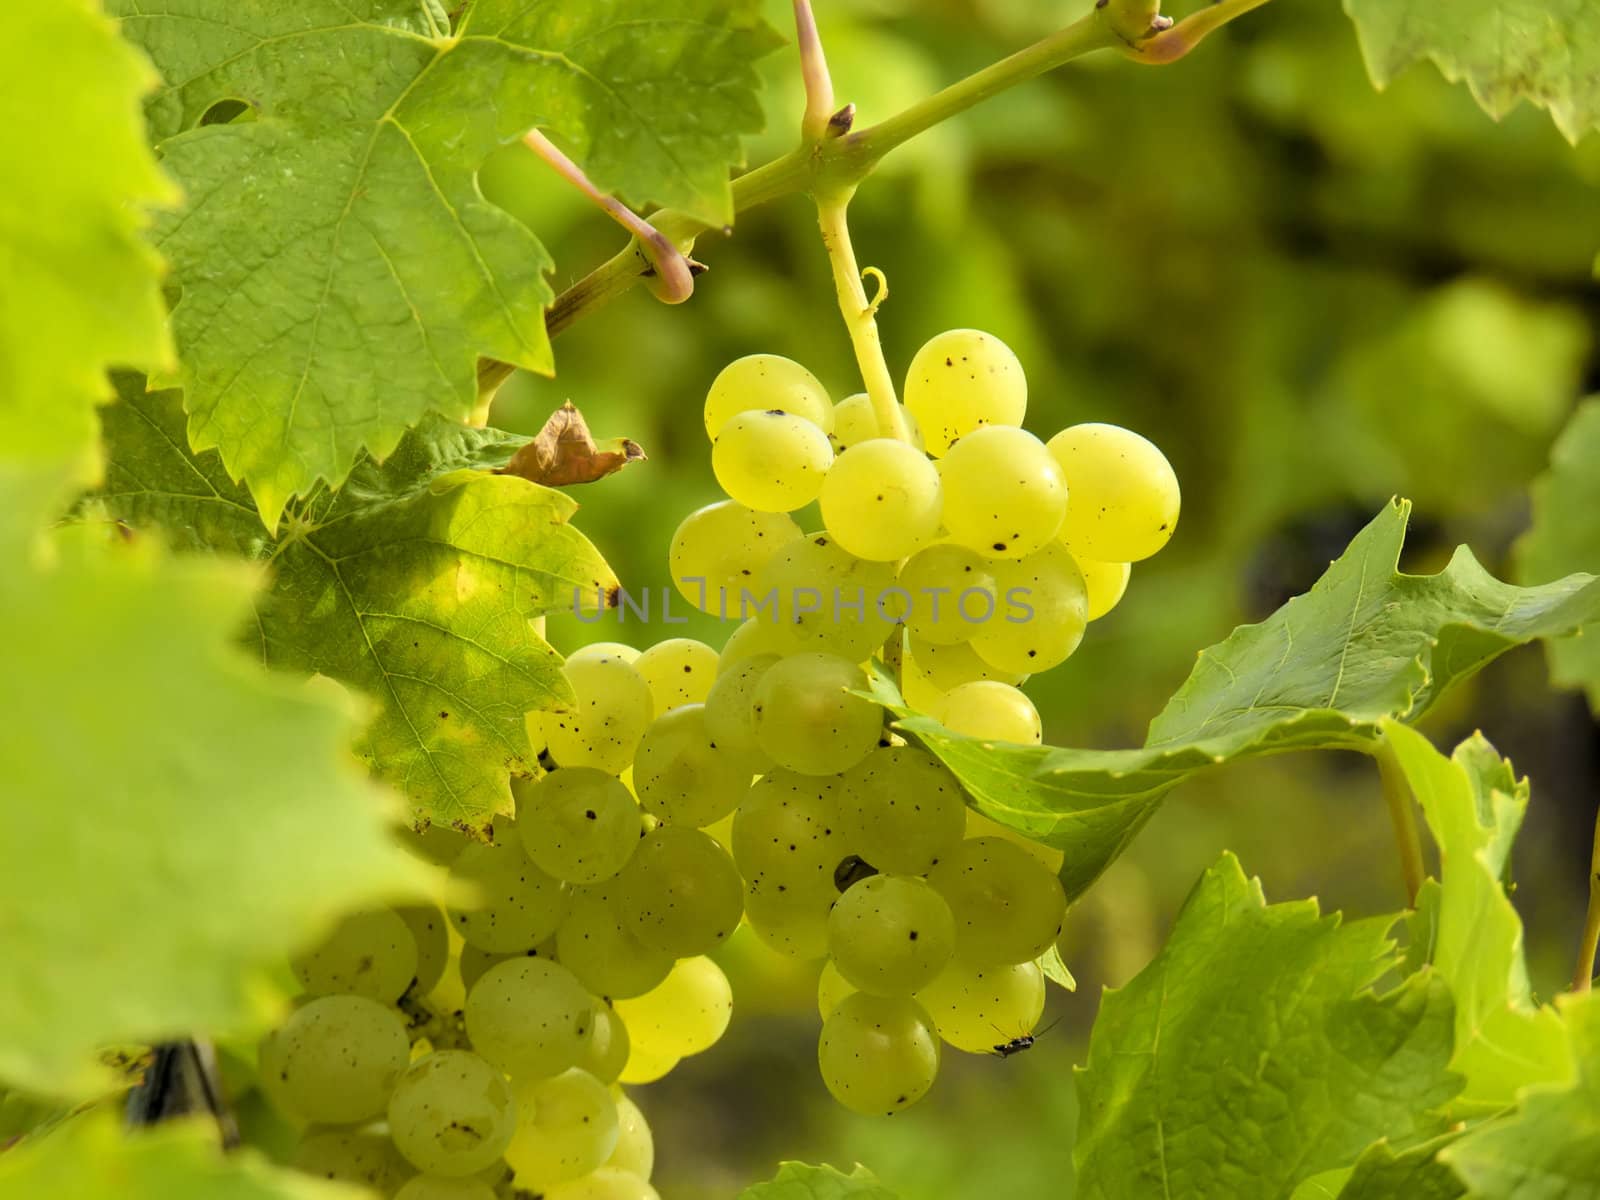 culture of vines and grapes by njaj